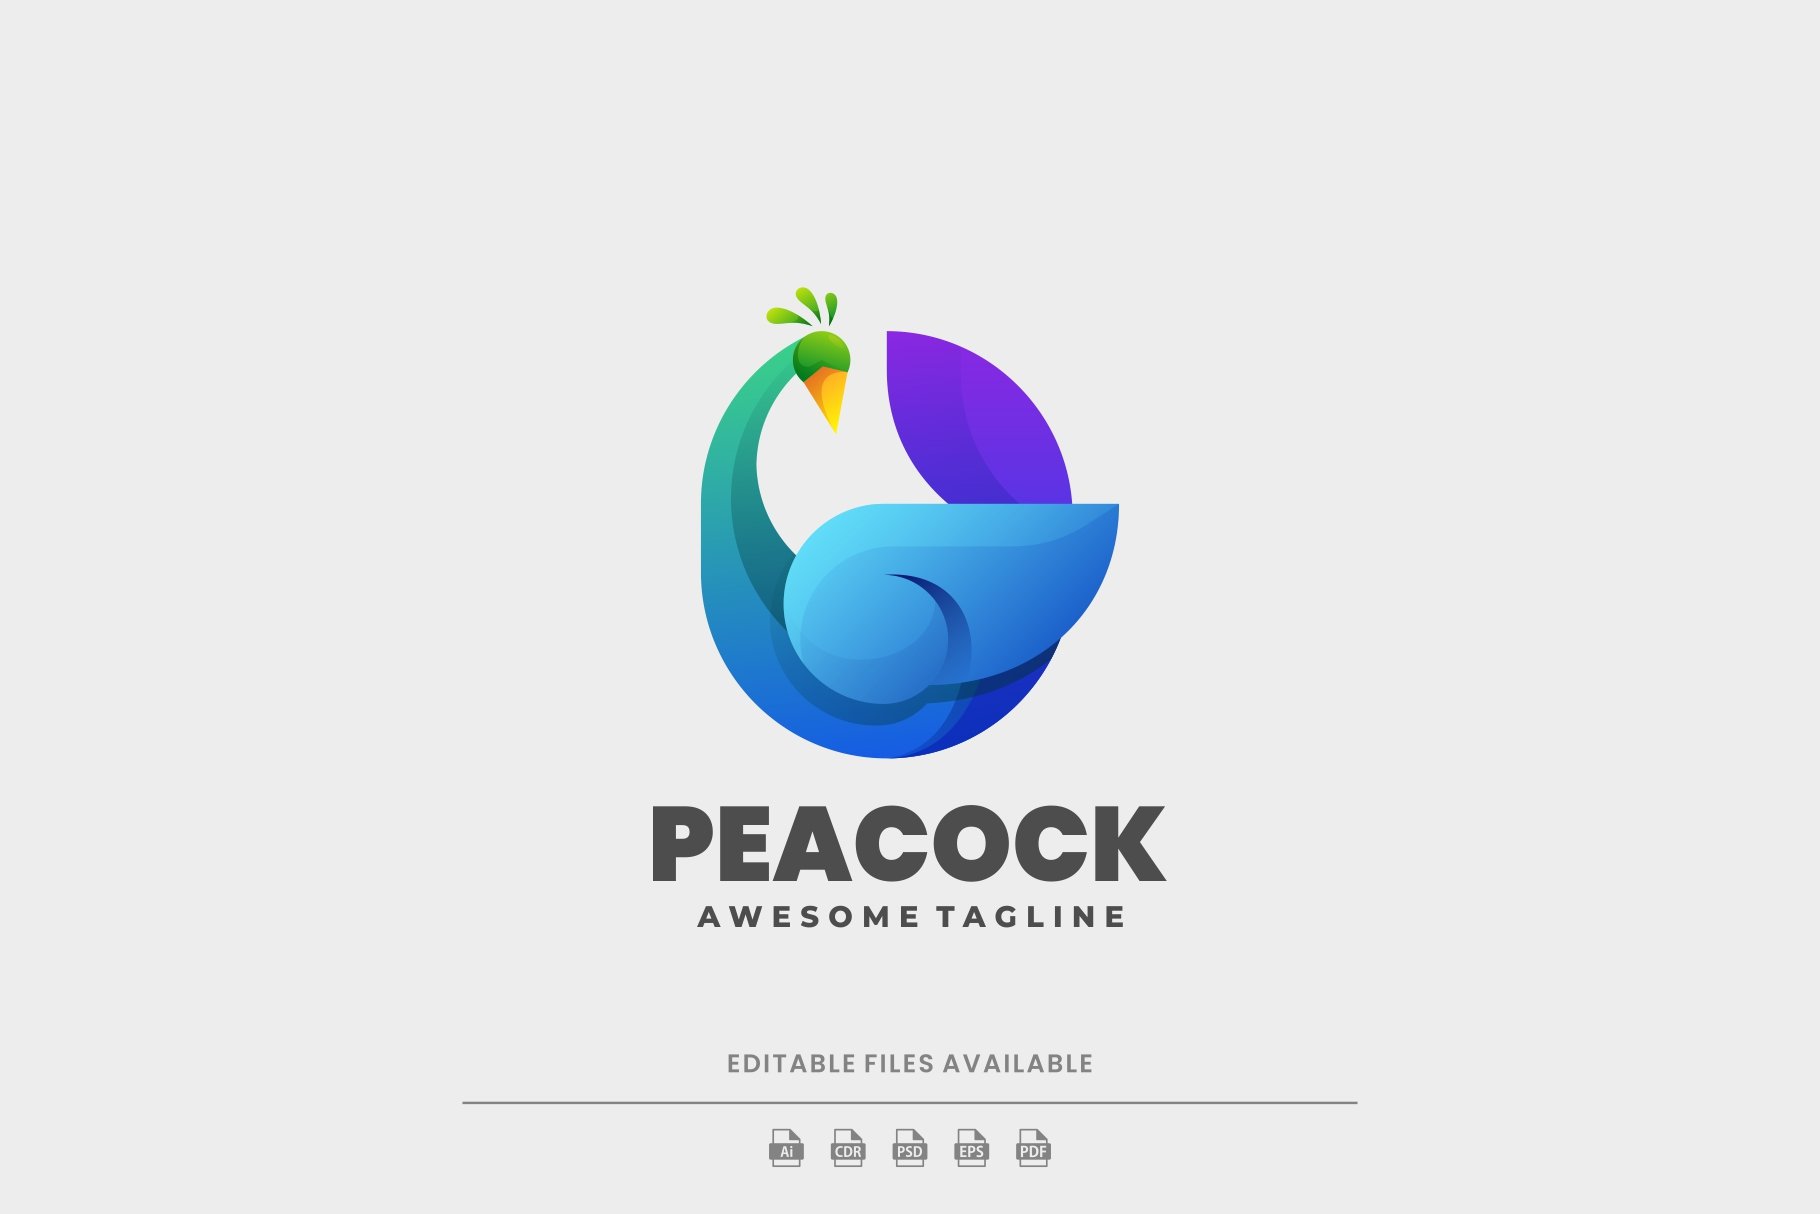 Pecock designs, themes, templates and downloadable graphic